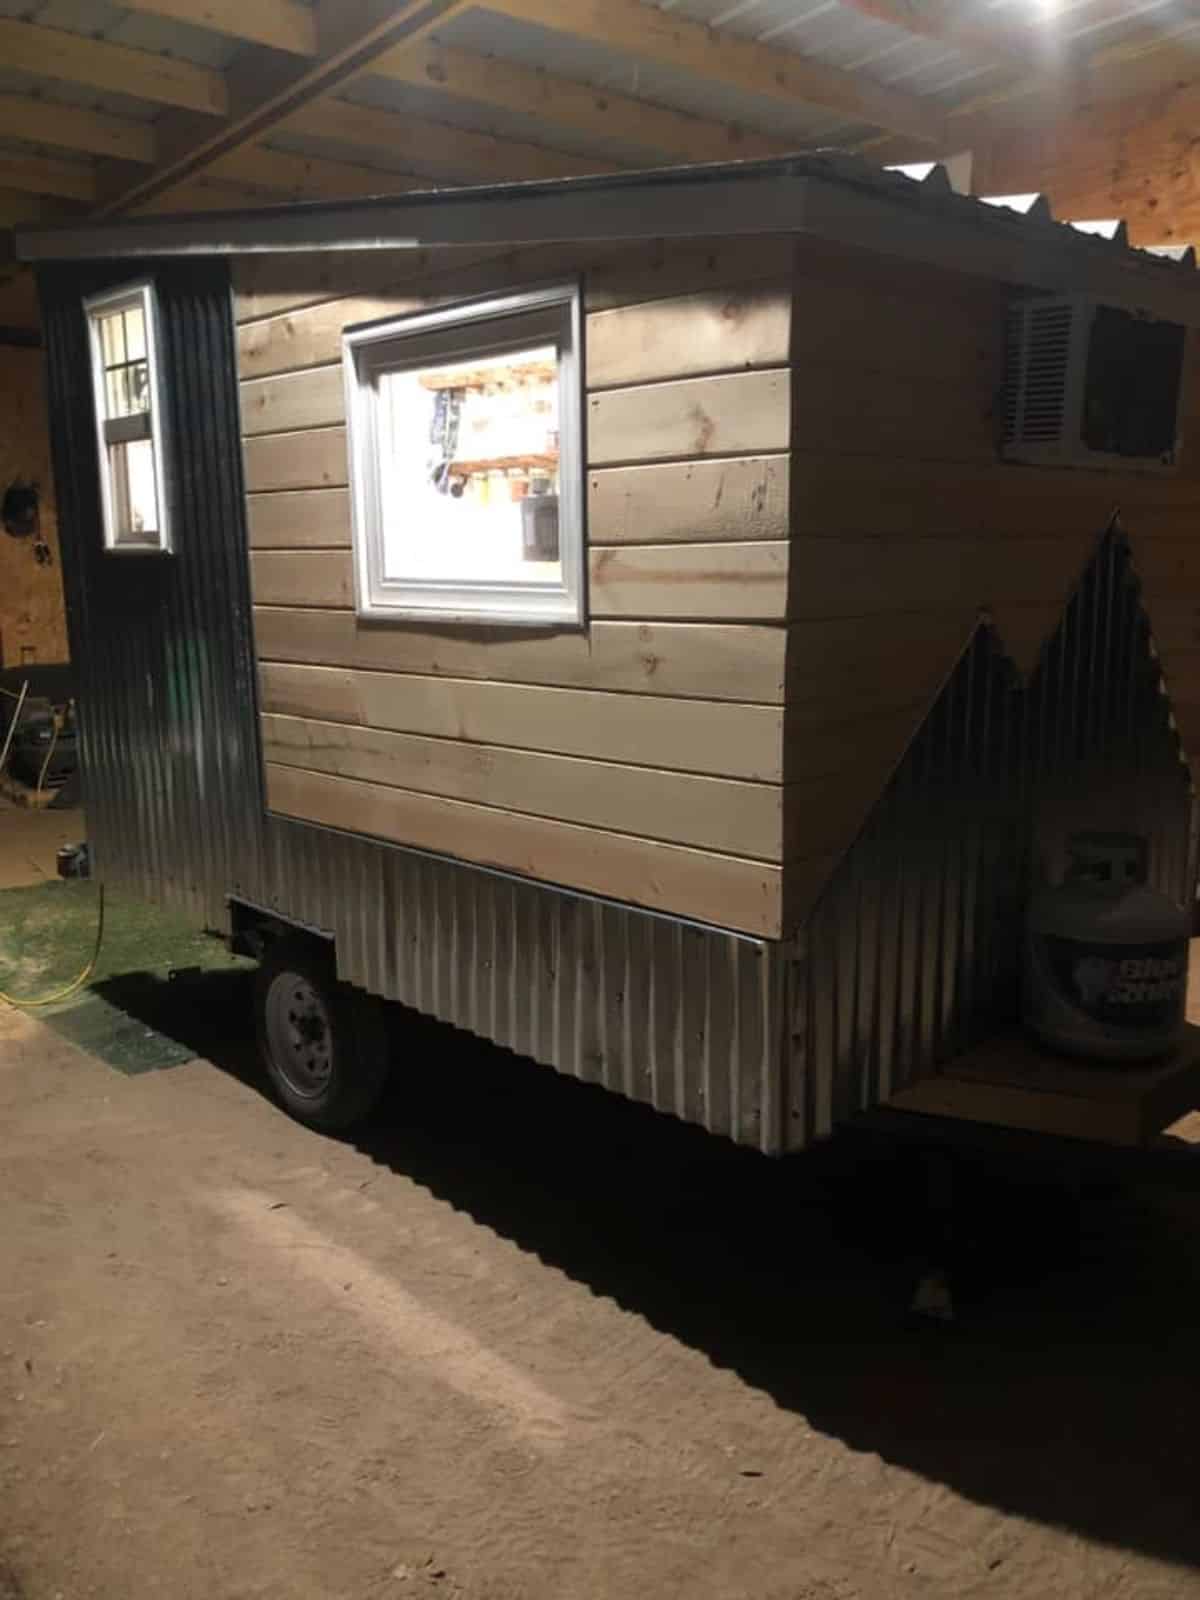 Side view of lightweight tiny home from outside